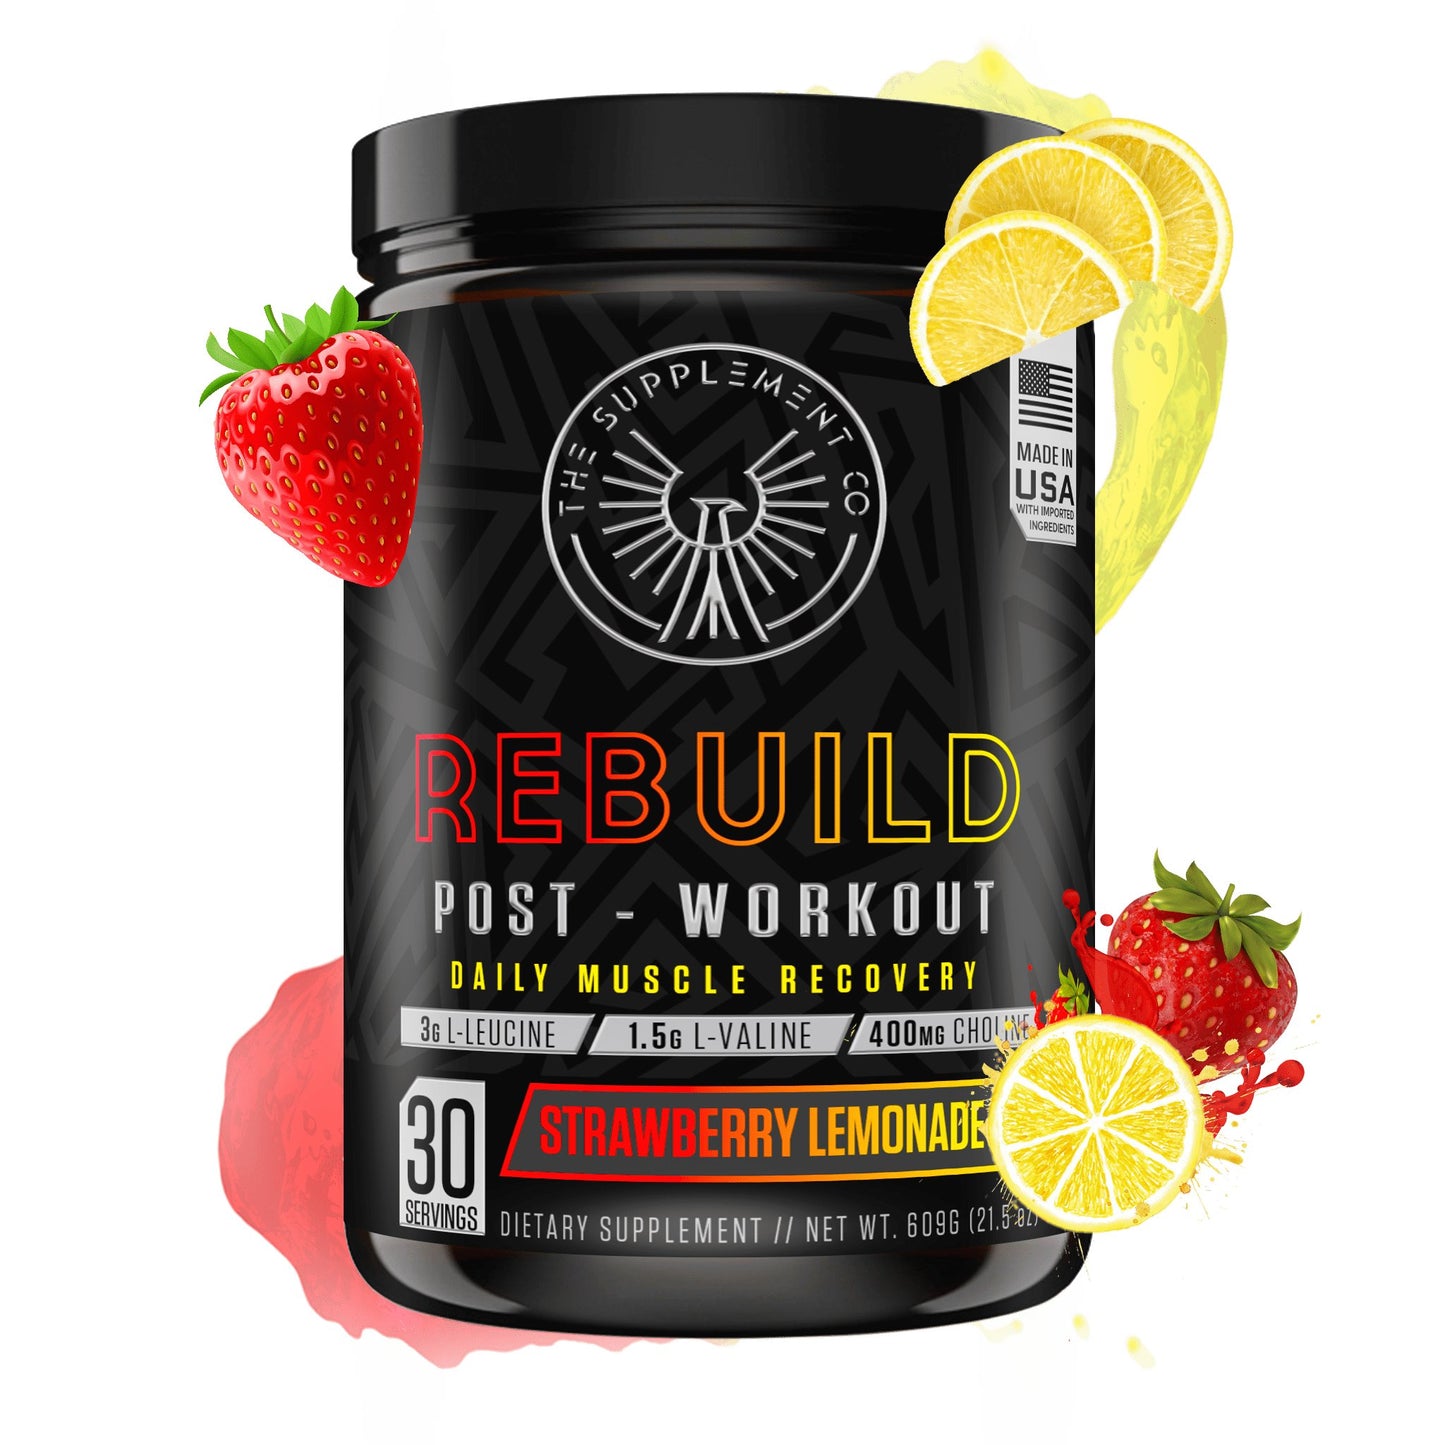 REBUILD POST WORKOUT - The Supplement Co